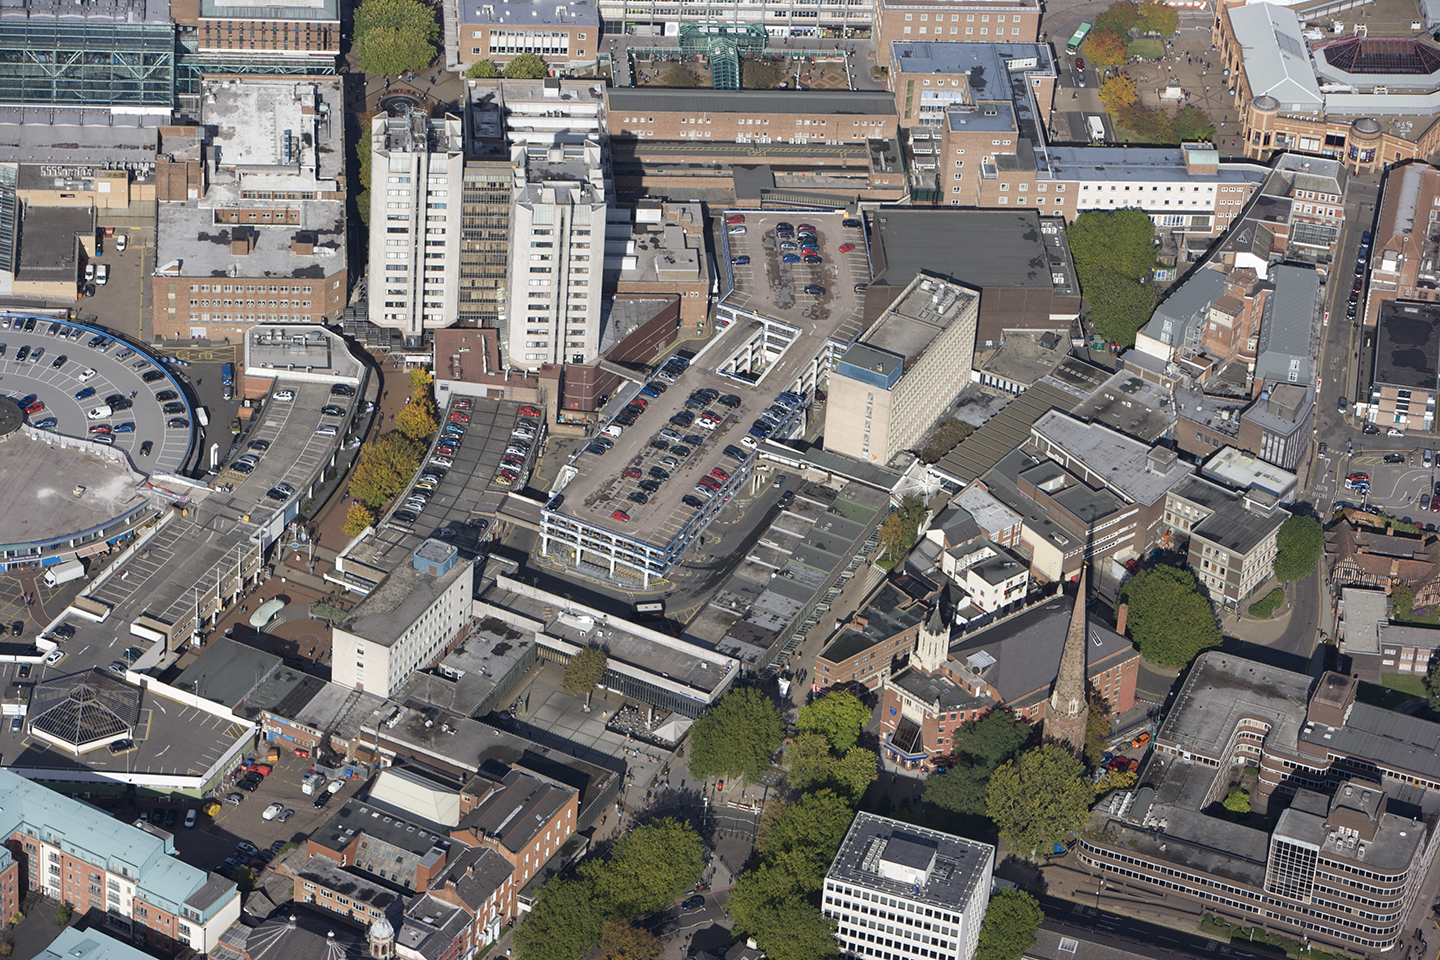 A panoramic view of Coventry showing tower blocks, car parks and office buildings.